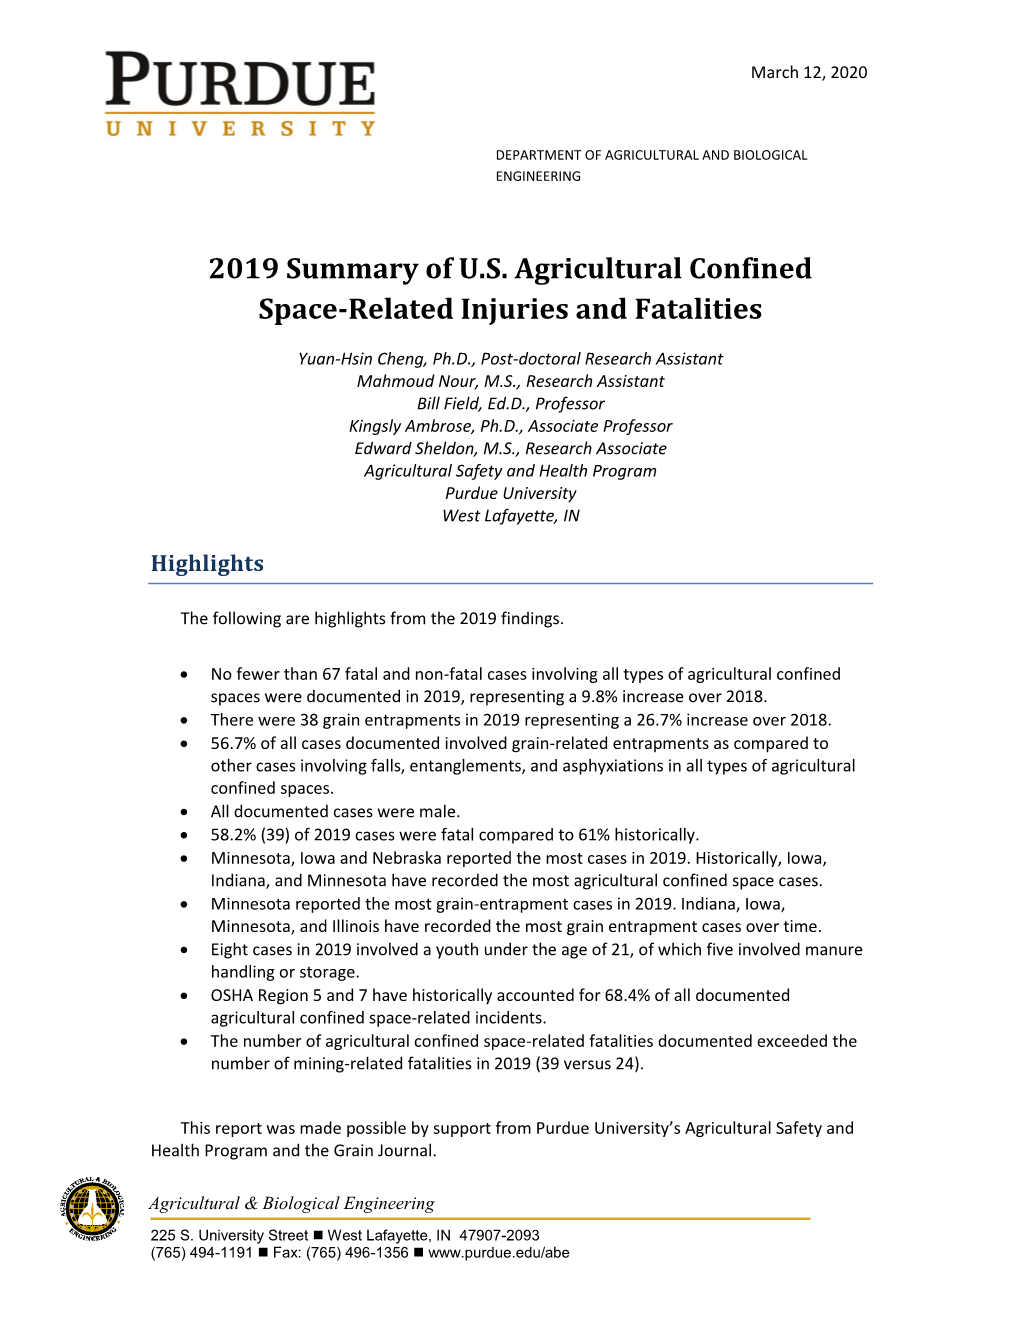 2019 Summary of US Agricultural Confined Space-Related